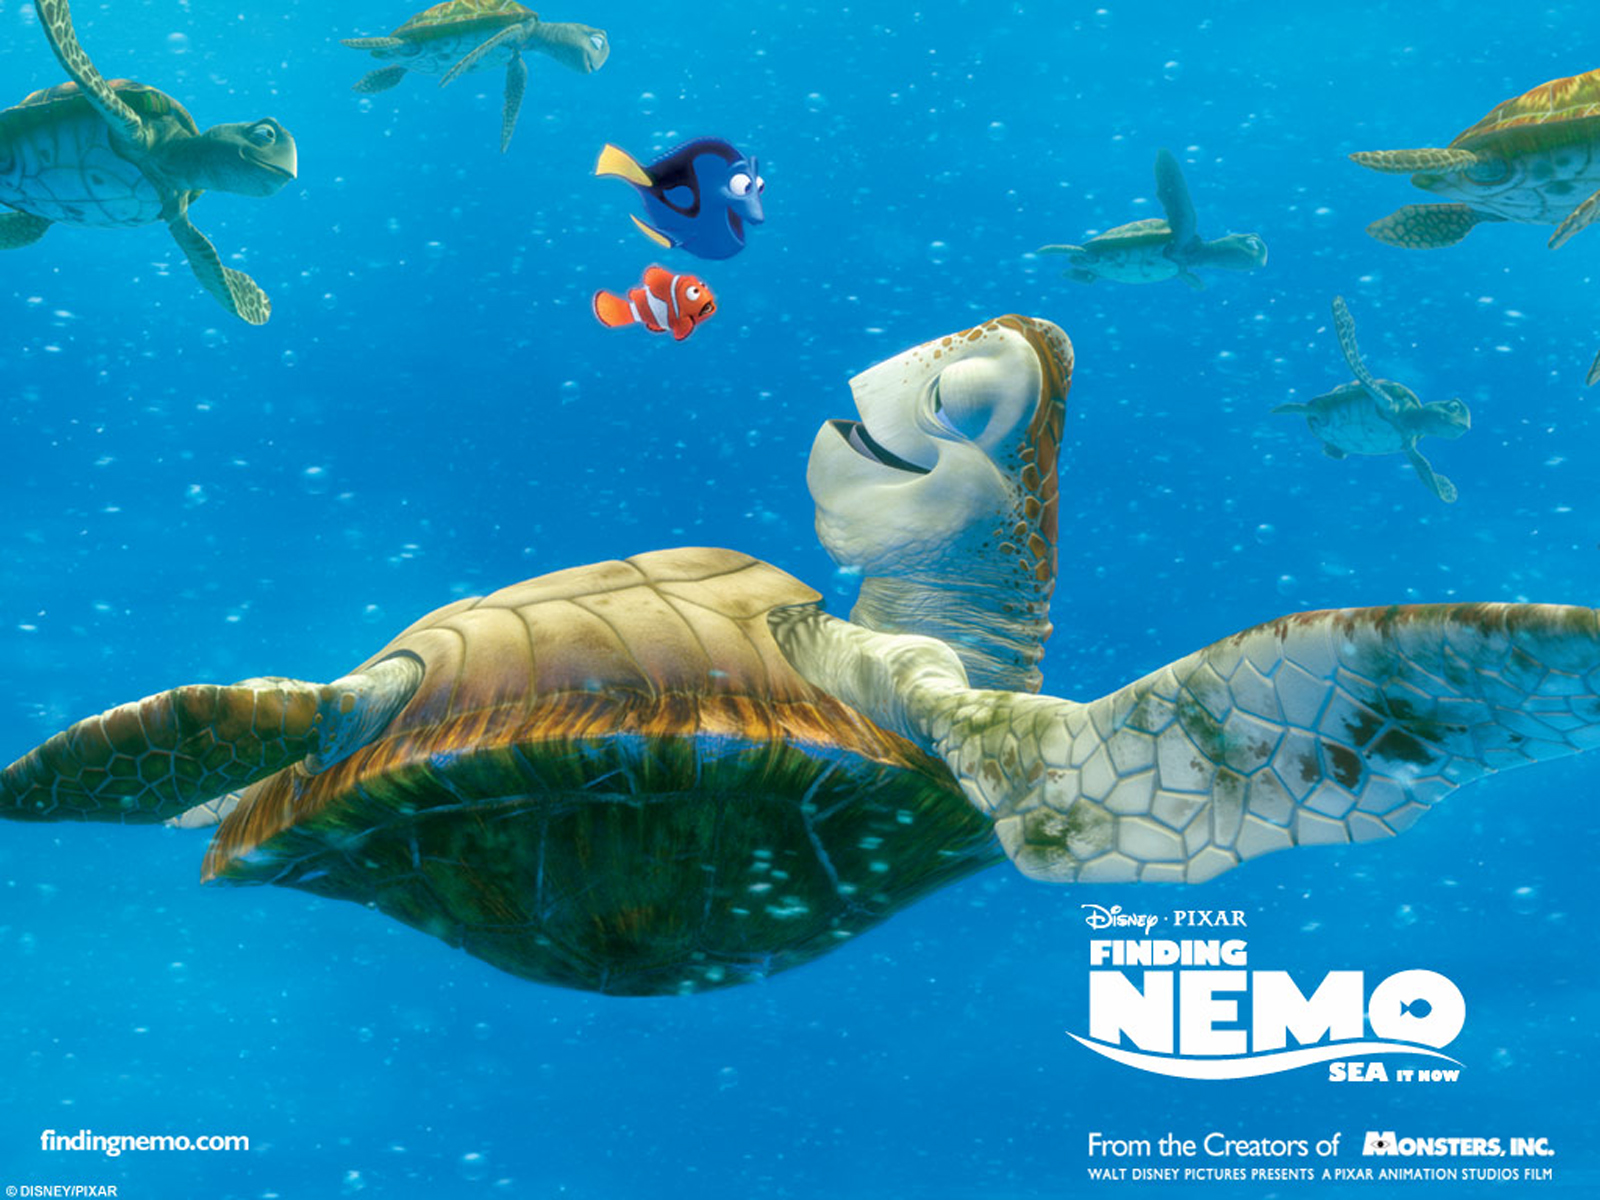 Nemo 3d Movie Poster HD Wallpaper High Resolution Background For